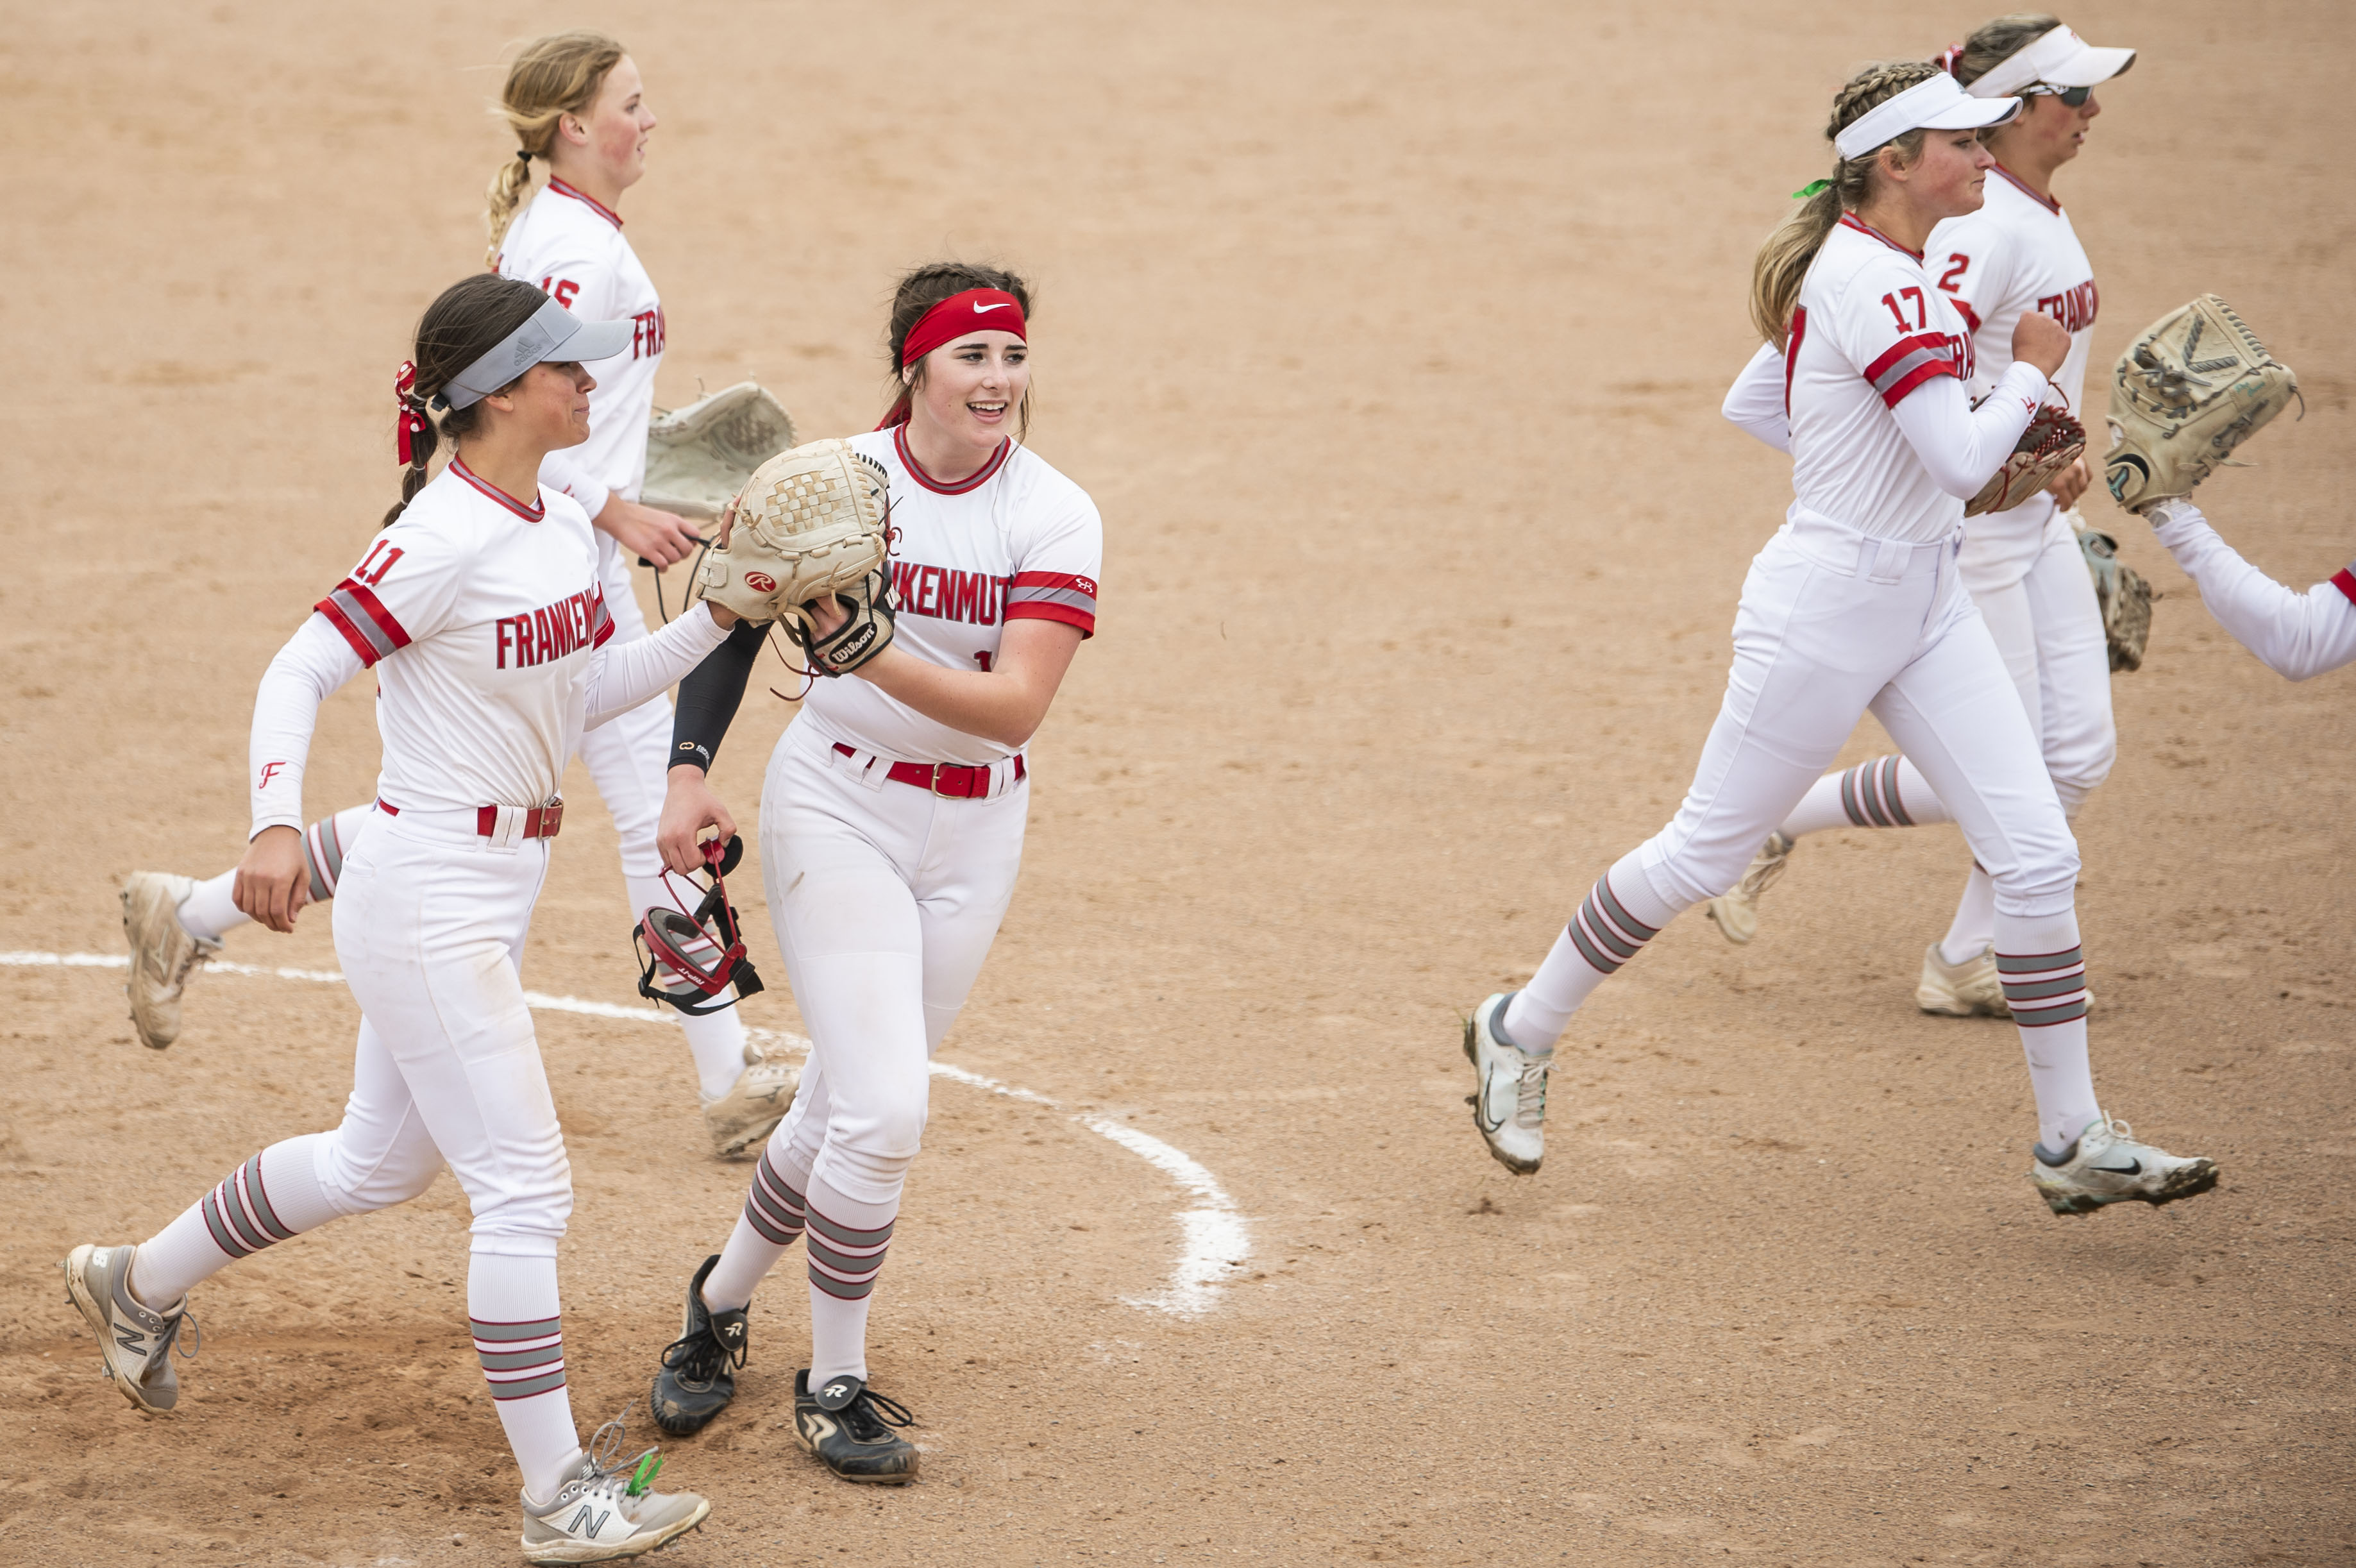 Frankenmuth softball defeats Garber in double header